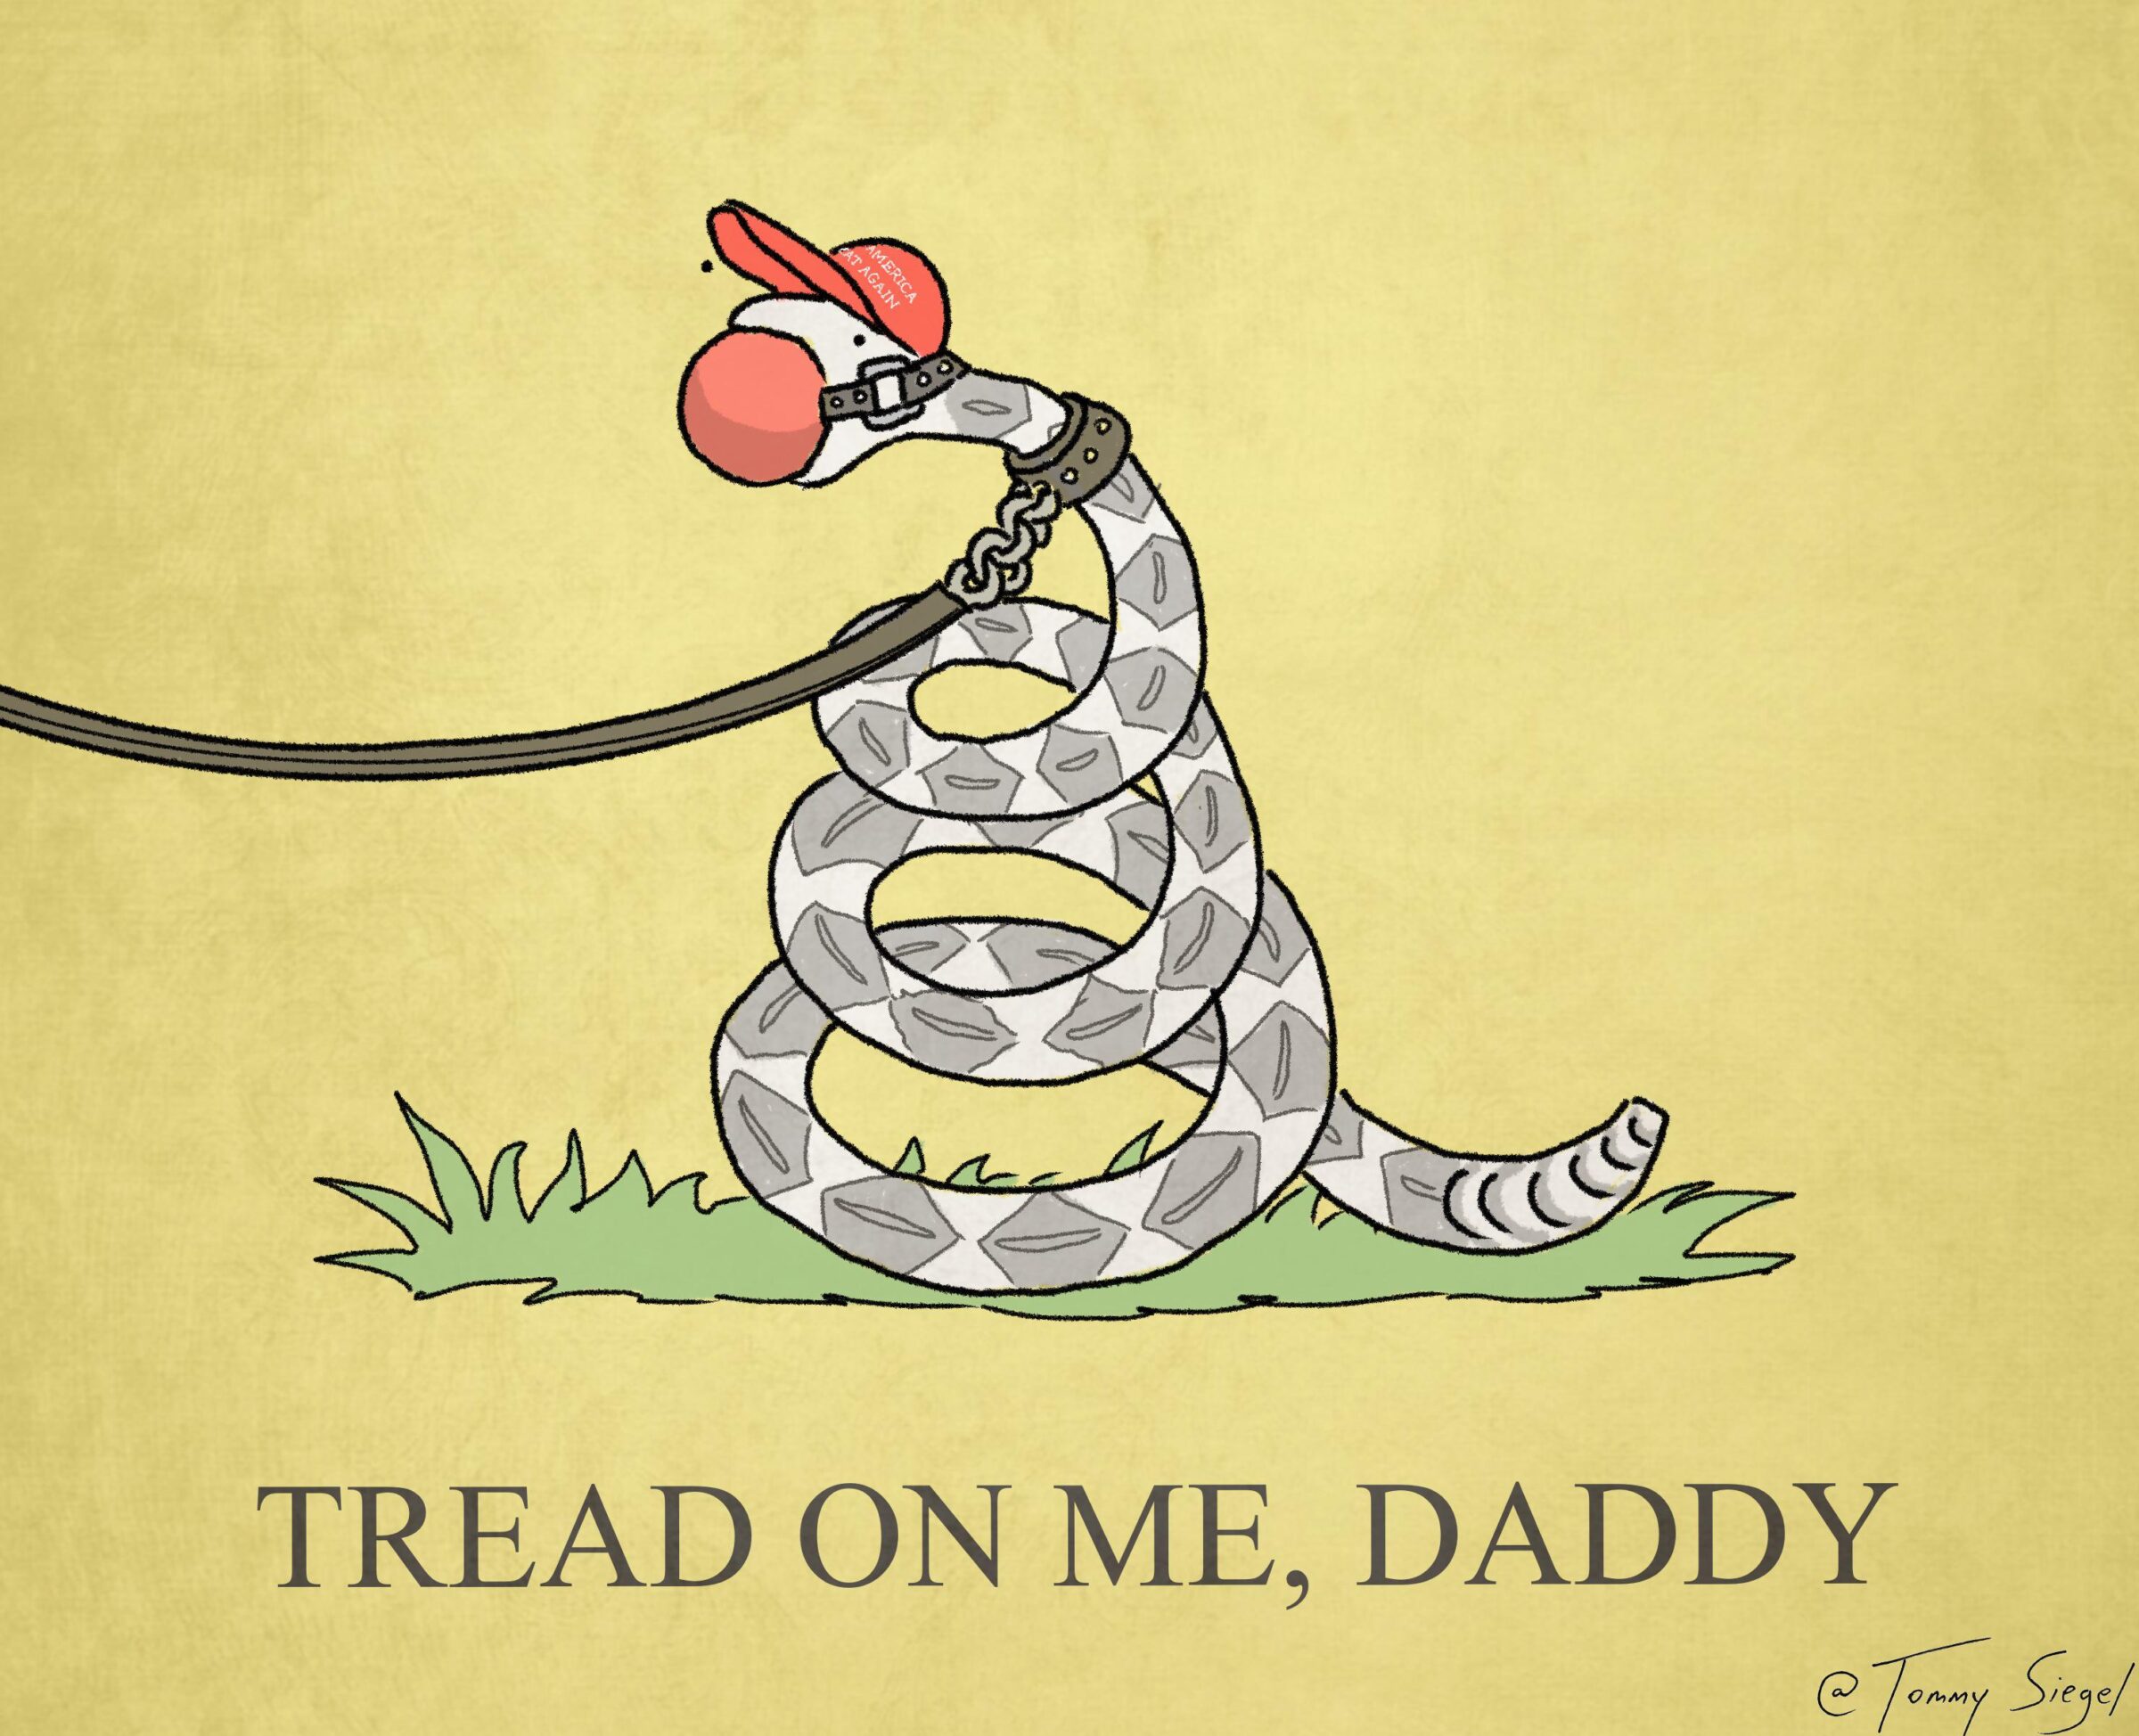 Really digging the new tea party flag design for 2020 (from tommysiegel), Trump, Tea Party Comics Really digging the new tea party flag design for 2020 (from tommysiegel), Trump, Tea Party text: A00V0 NO 